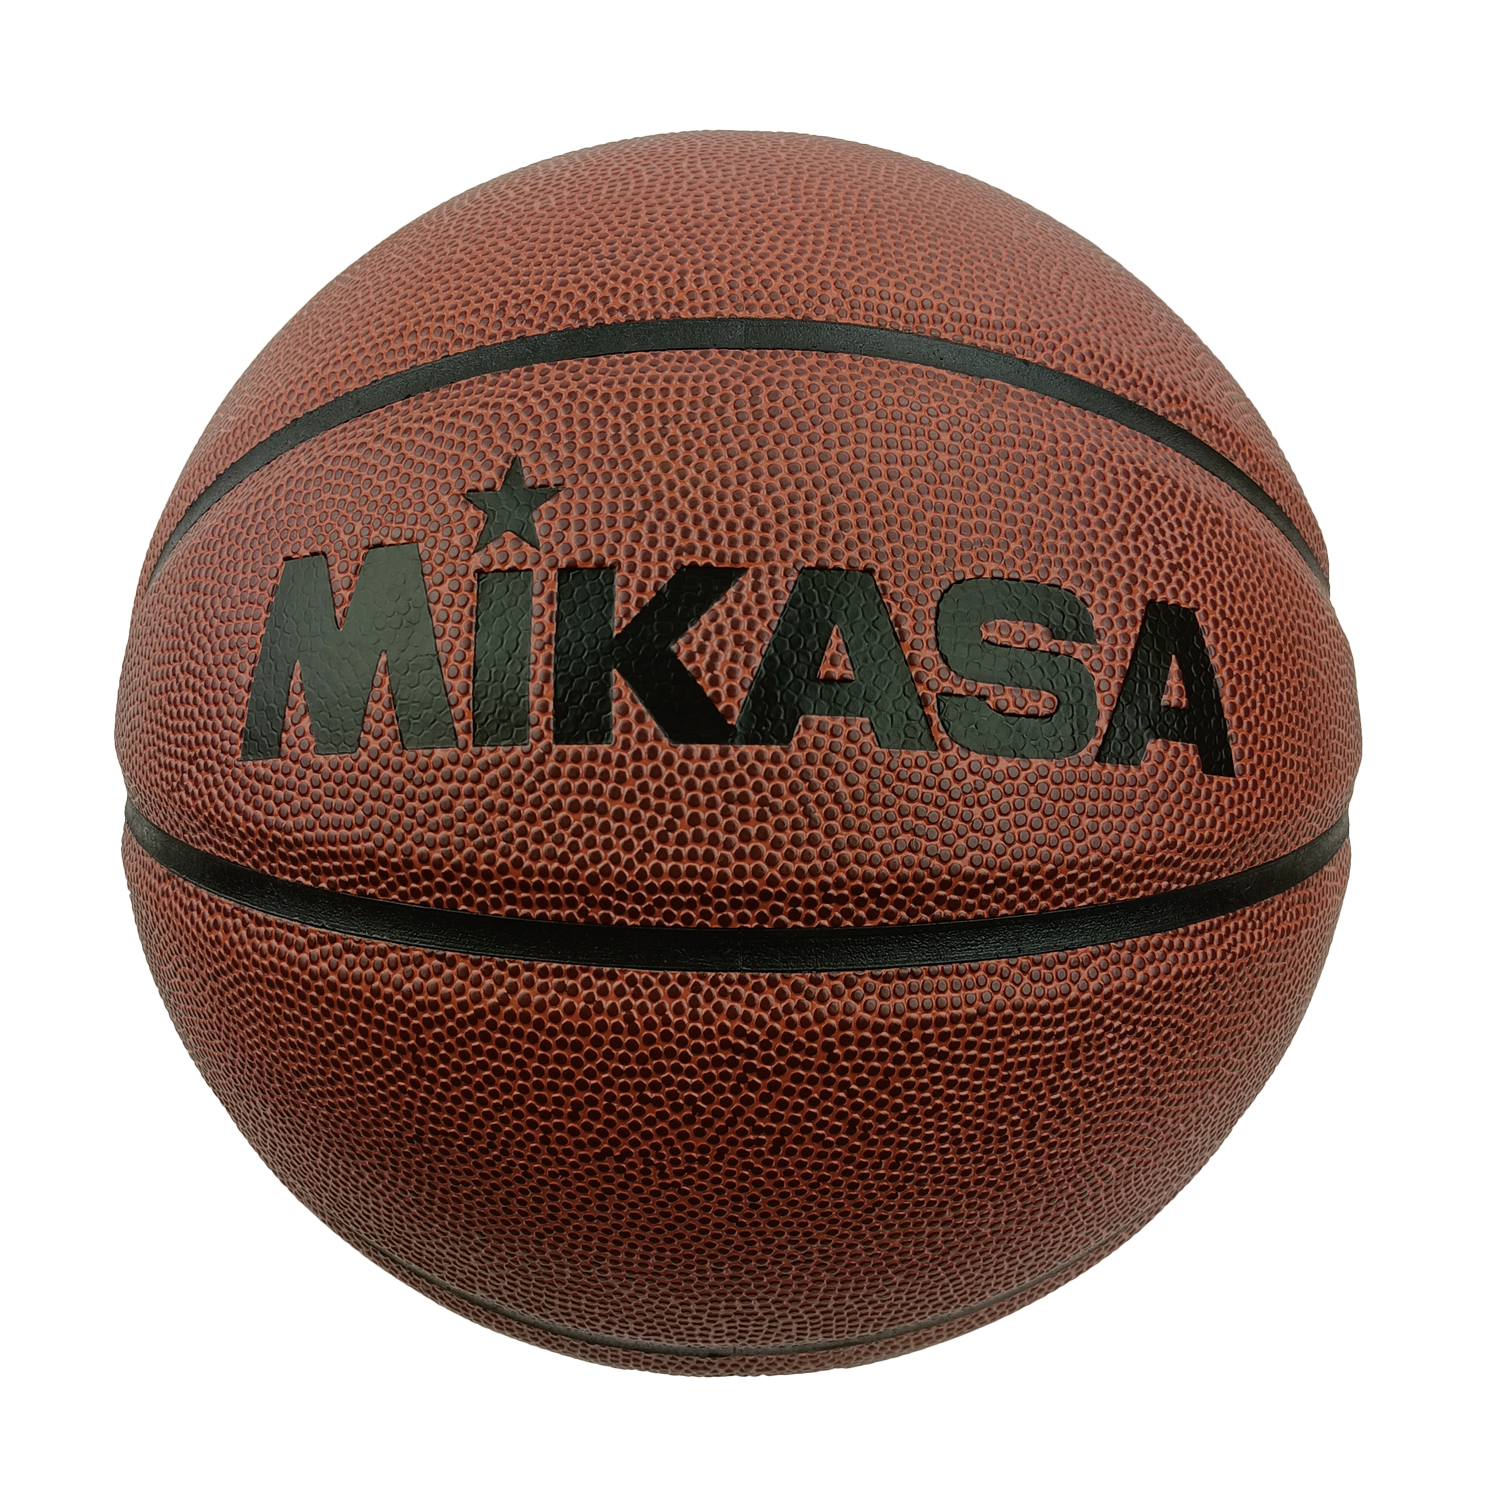 MIKASA CF700 BASKETBALL HIGH GRADE SYNTHETIC LEATHER SIZE 7